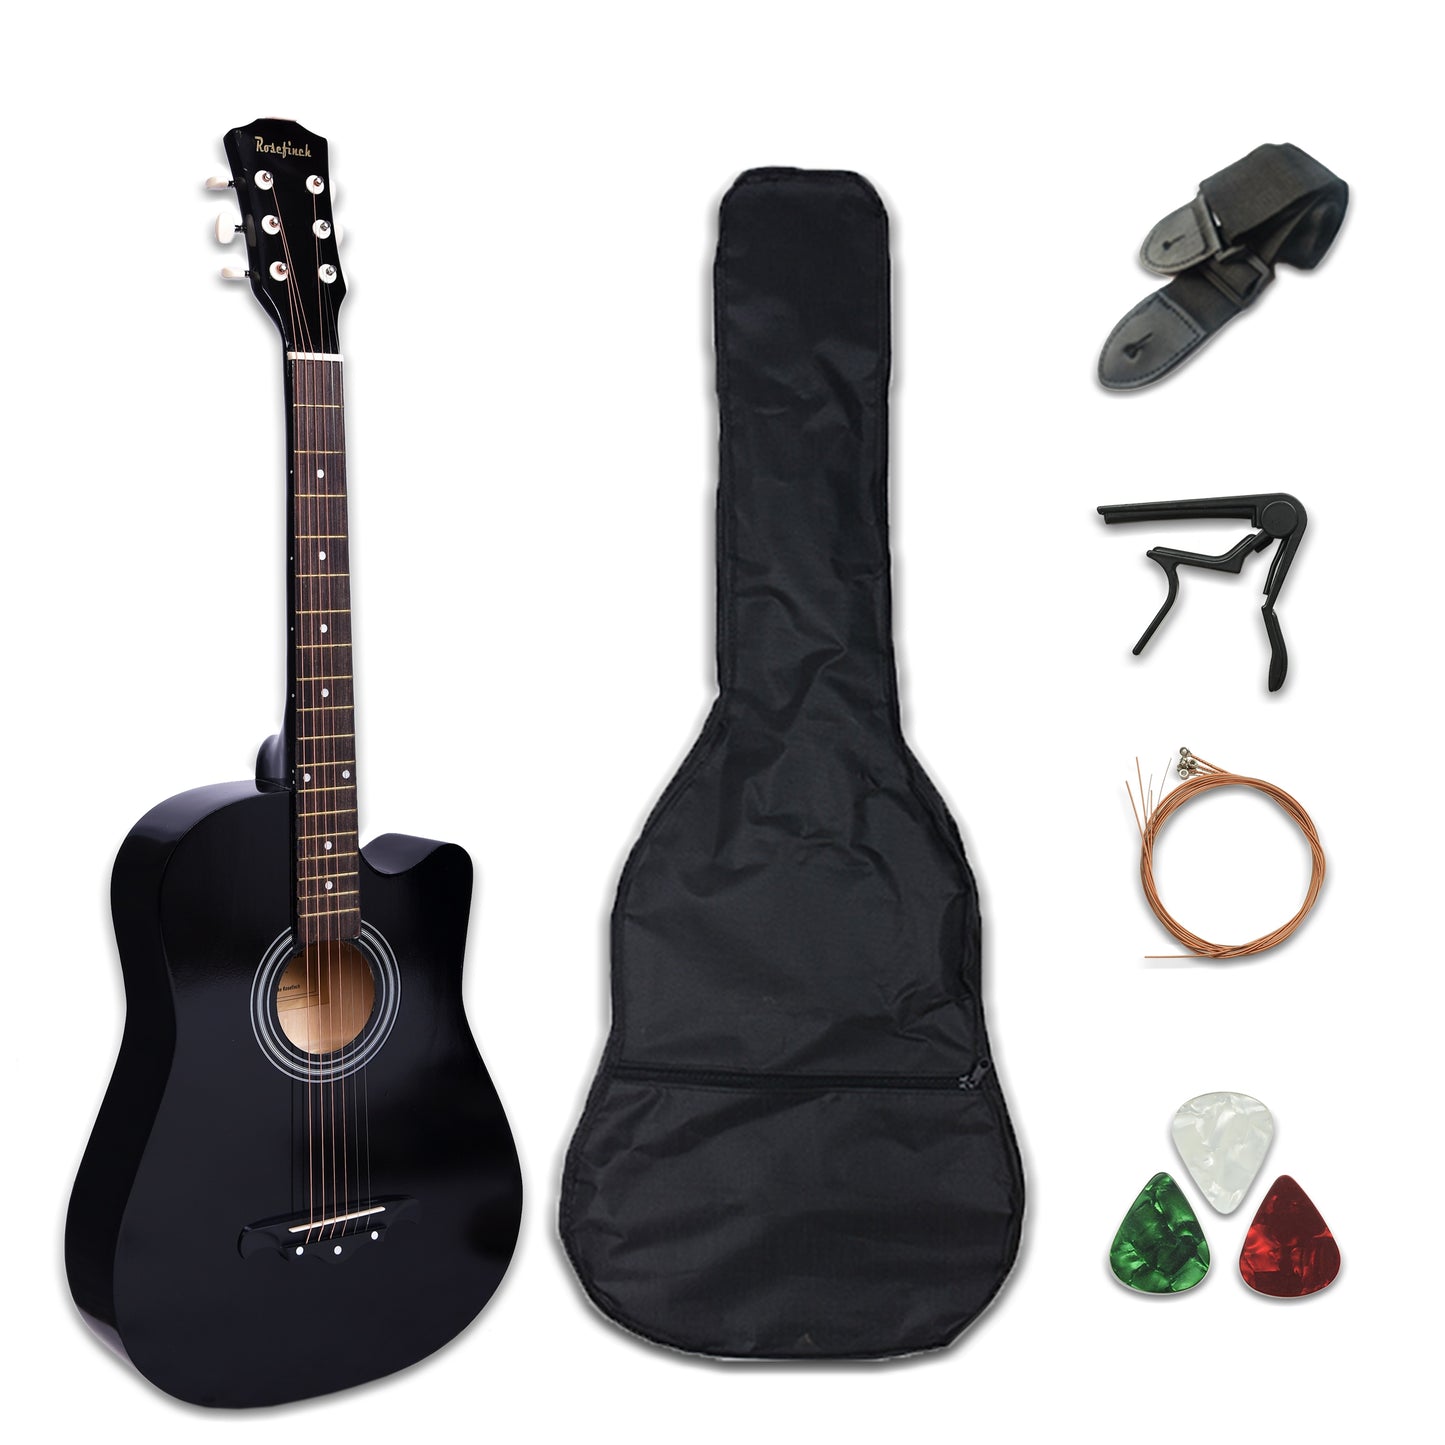 AGT16 41/38 Inch Acoustic Travel Guitar for Kids and  Adults, comes with Capo, Picks, Bag, and 6 Steel Strings